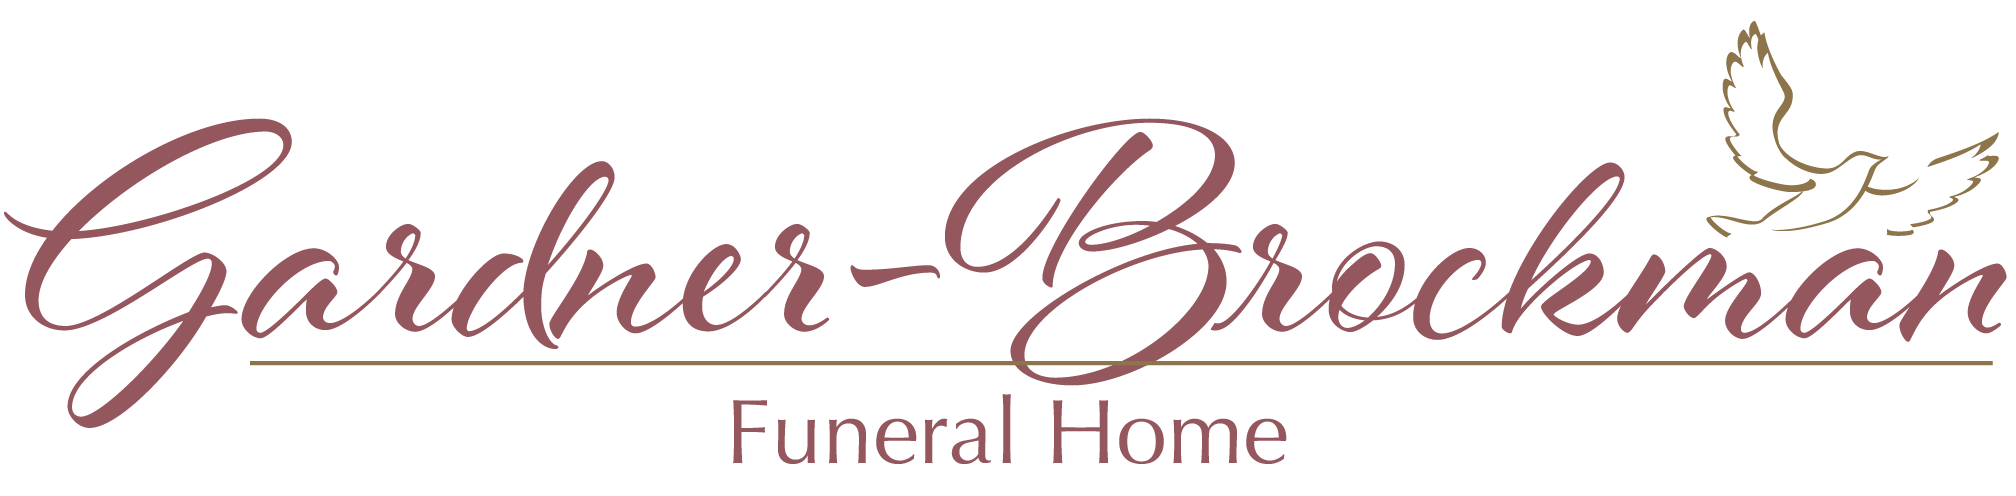 Funeral Home Logo - Goodwin Funeral Home